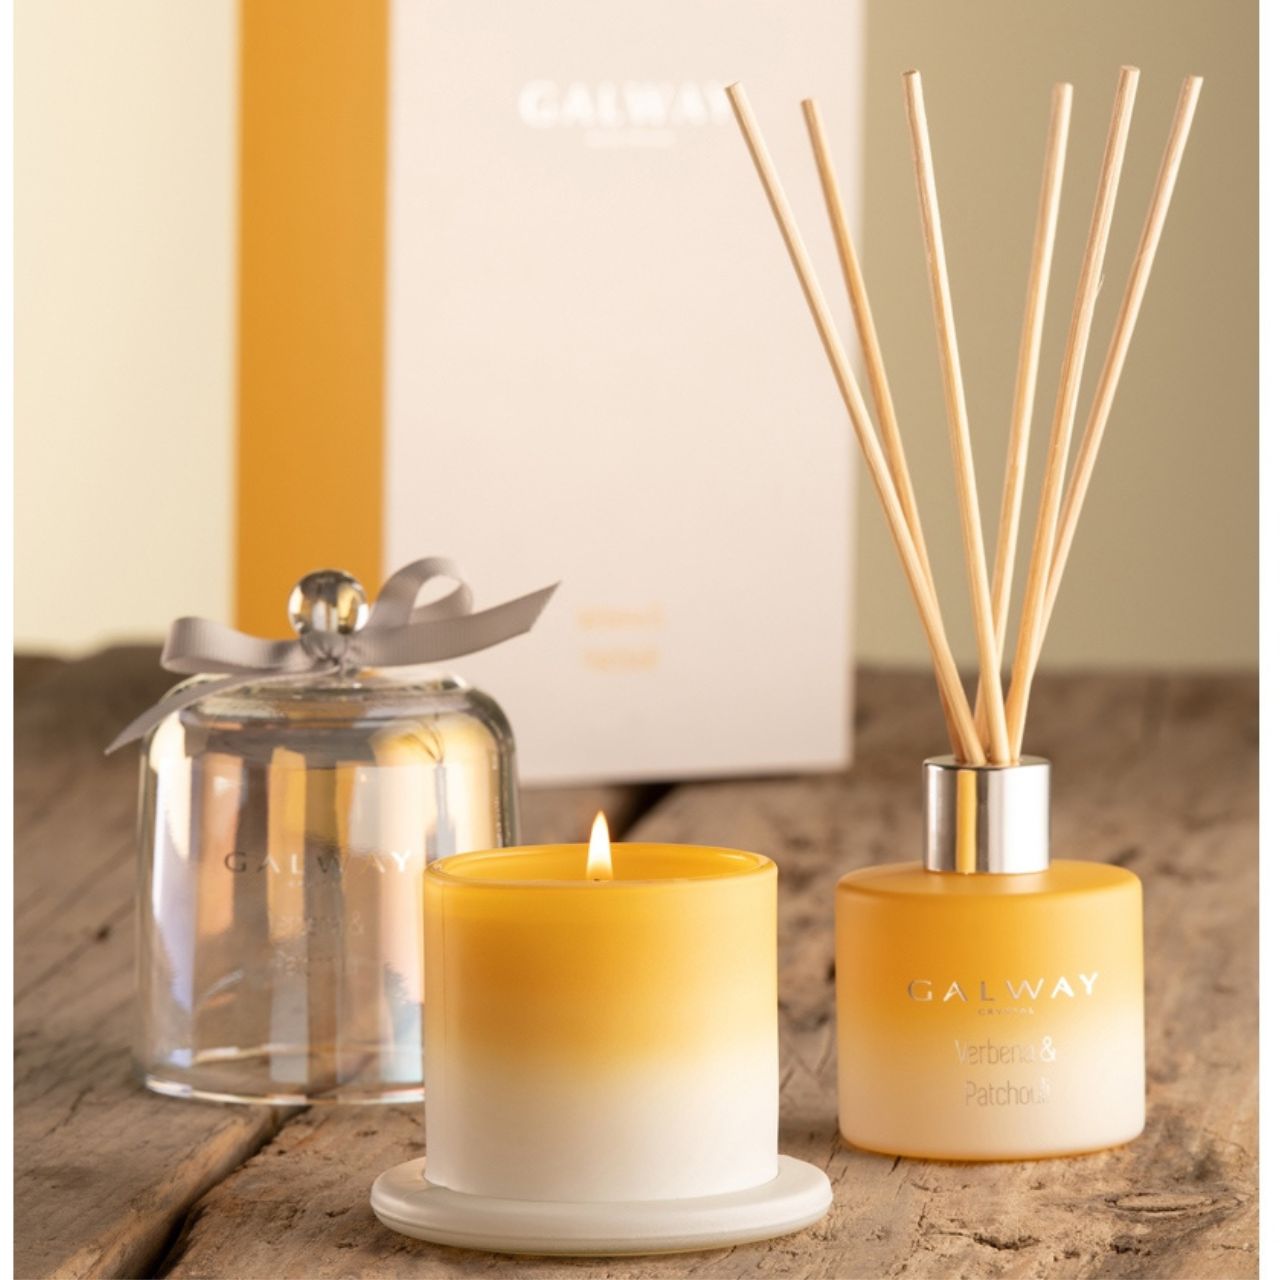 Verbena & Patchouli Diffuser by Galway Crystal  Transport yourself to a special place with the perfect fragrance for your home. Our Verbena & Patchouli scent will transform any room and will certainly set the right mood. Zesty citrus top notes of verbena & bergamot are paired with relaxing lavender.